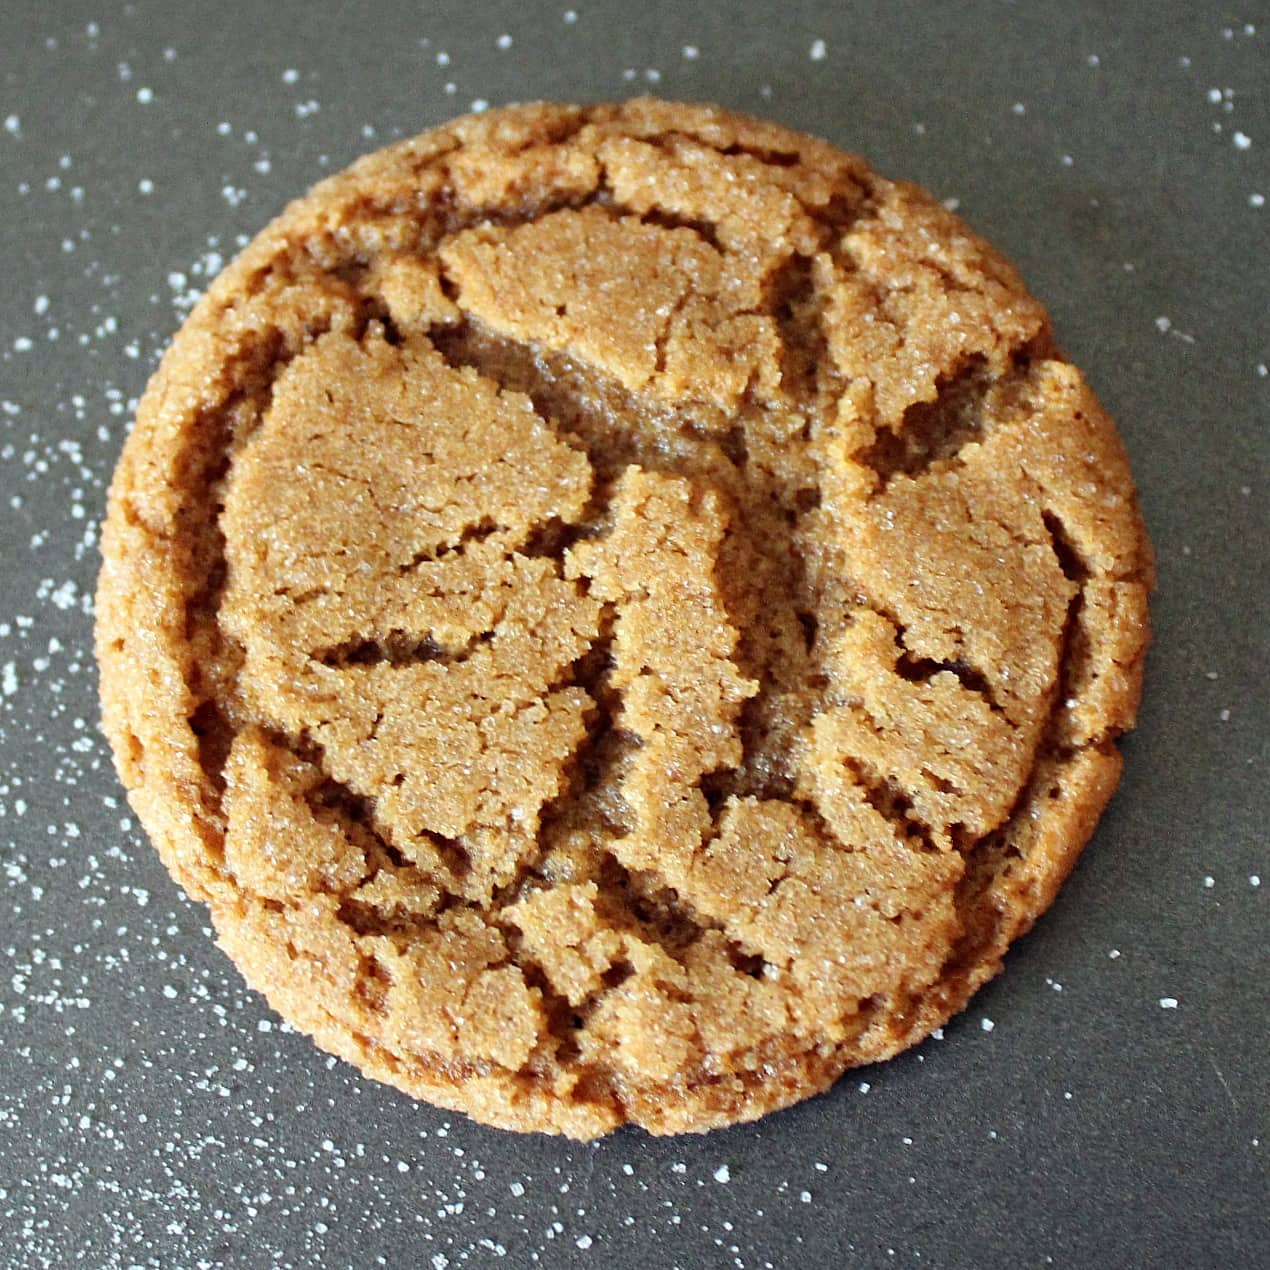 Overhead view of one light brown cookie made with ginger, crackled on top. Granulated sugar is also pictured.